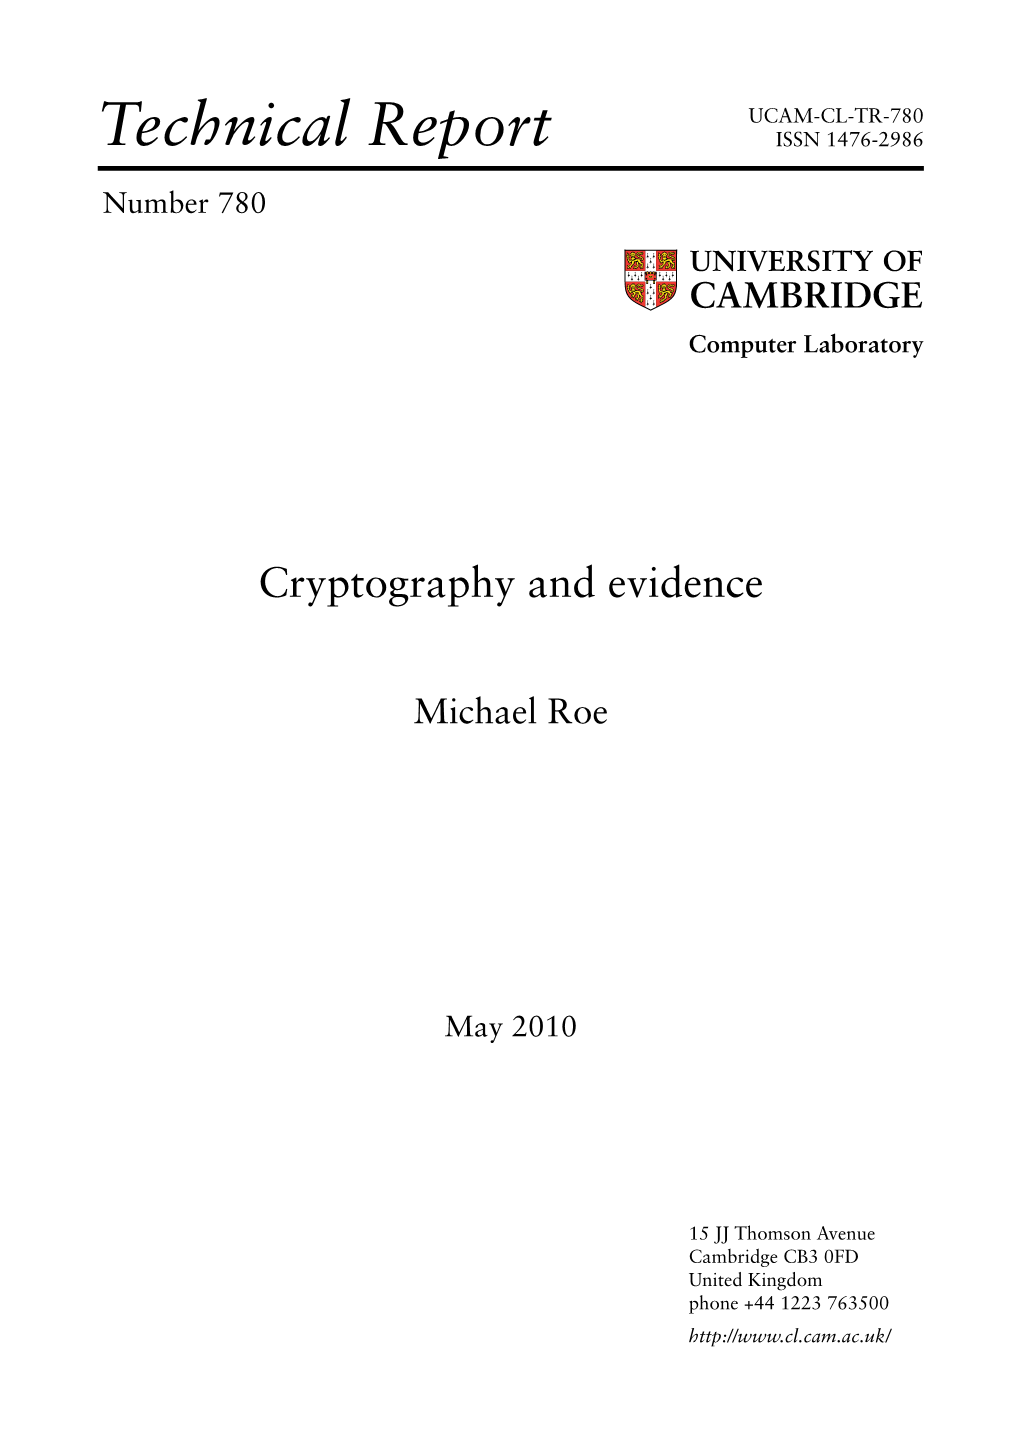 Cryptography and Evidence